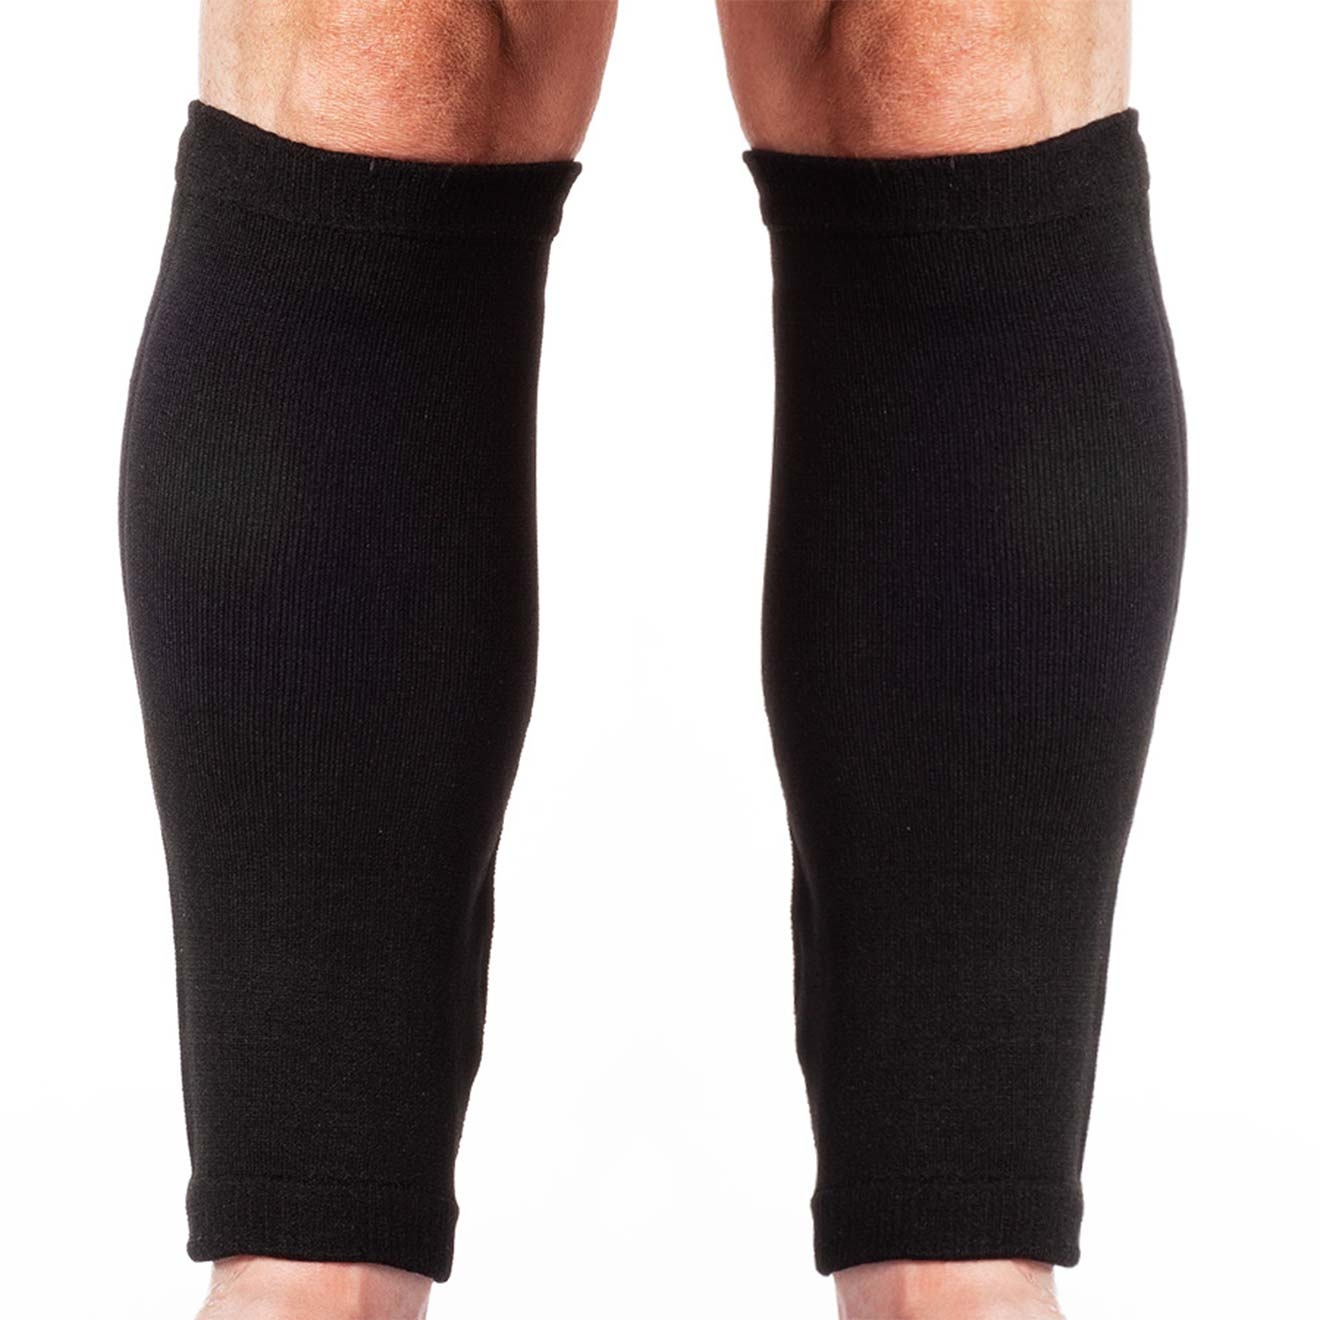 Leg Sleeves, Full Fit – Frail skin protection for larger & swollen legs Large – Limb Keepers